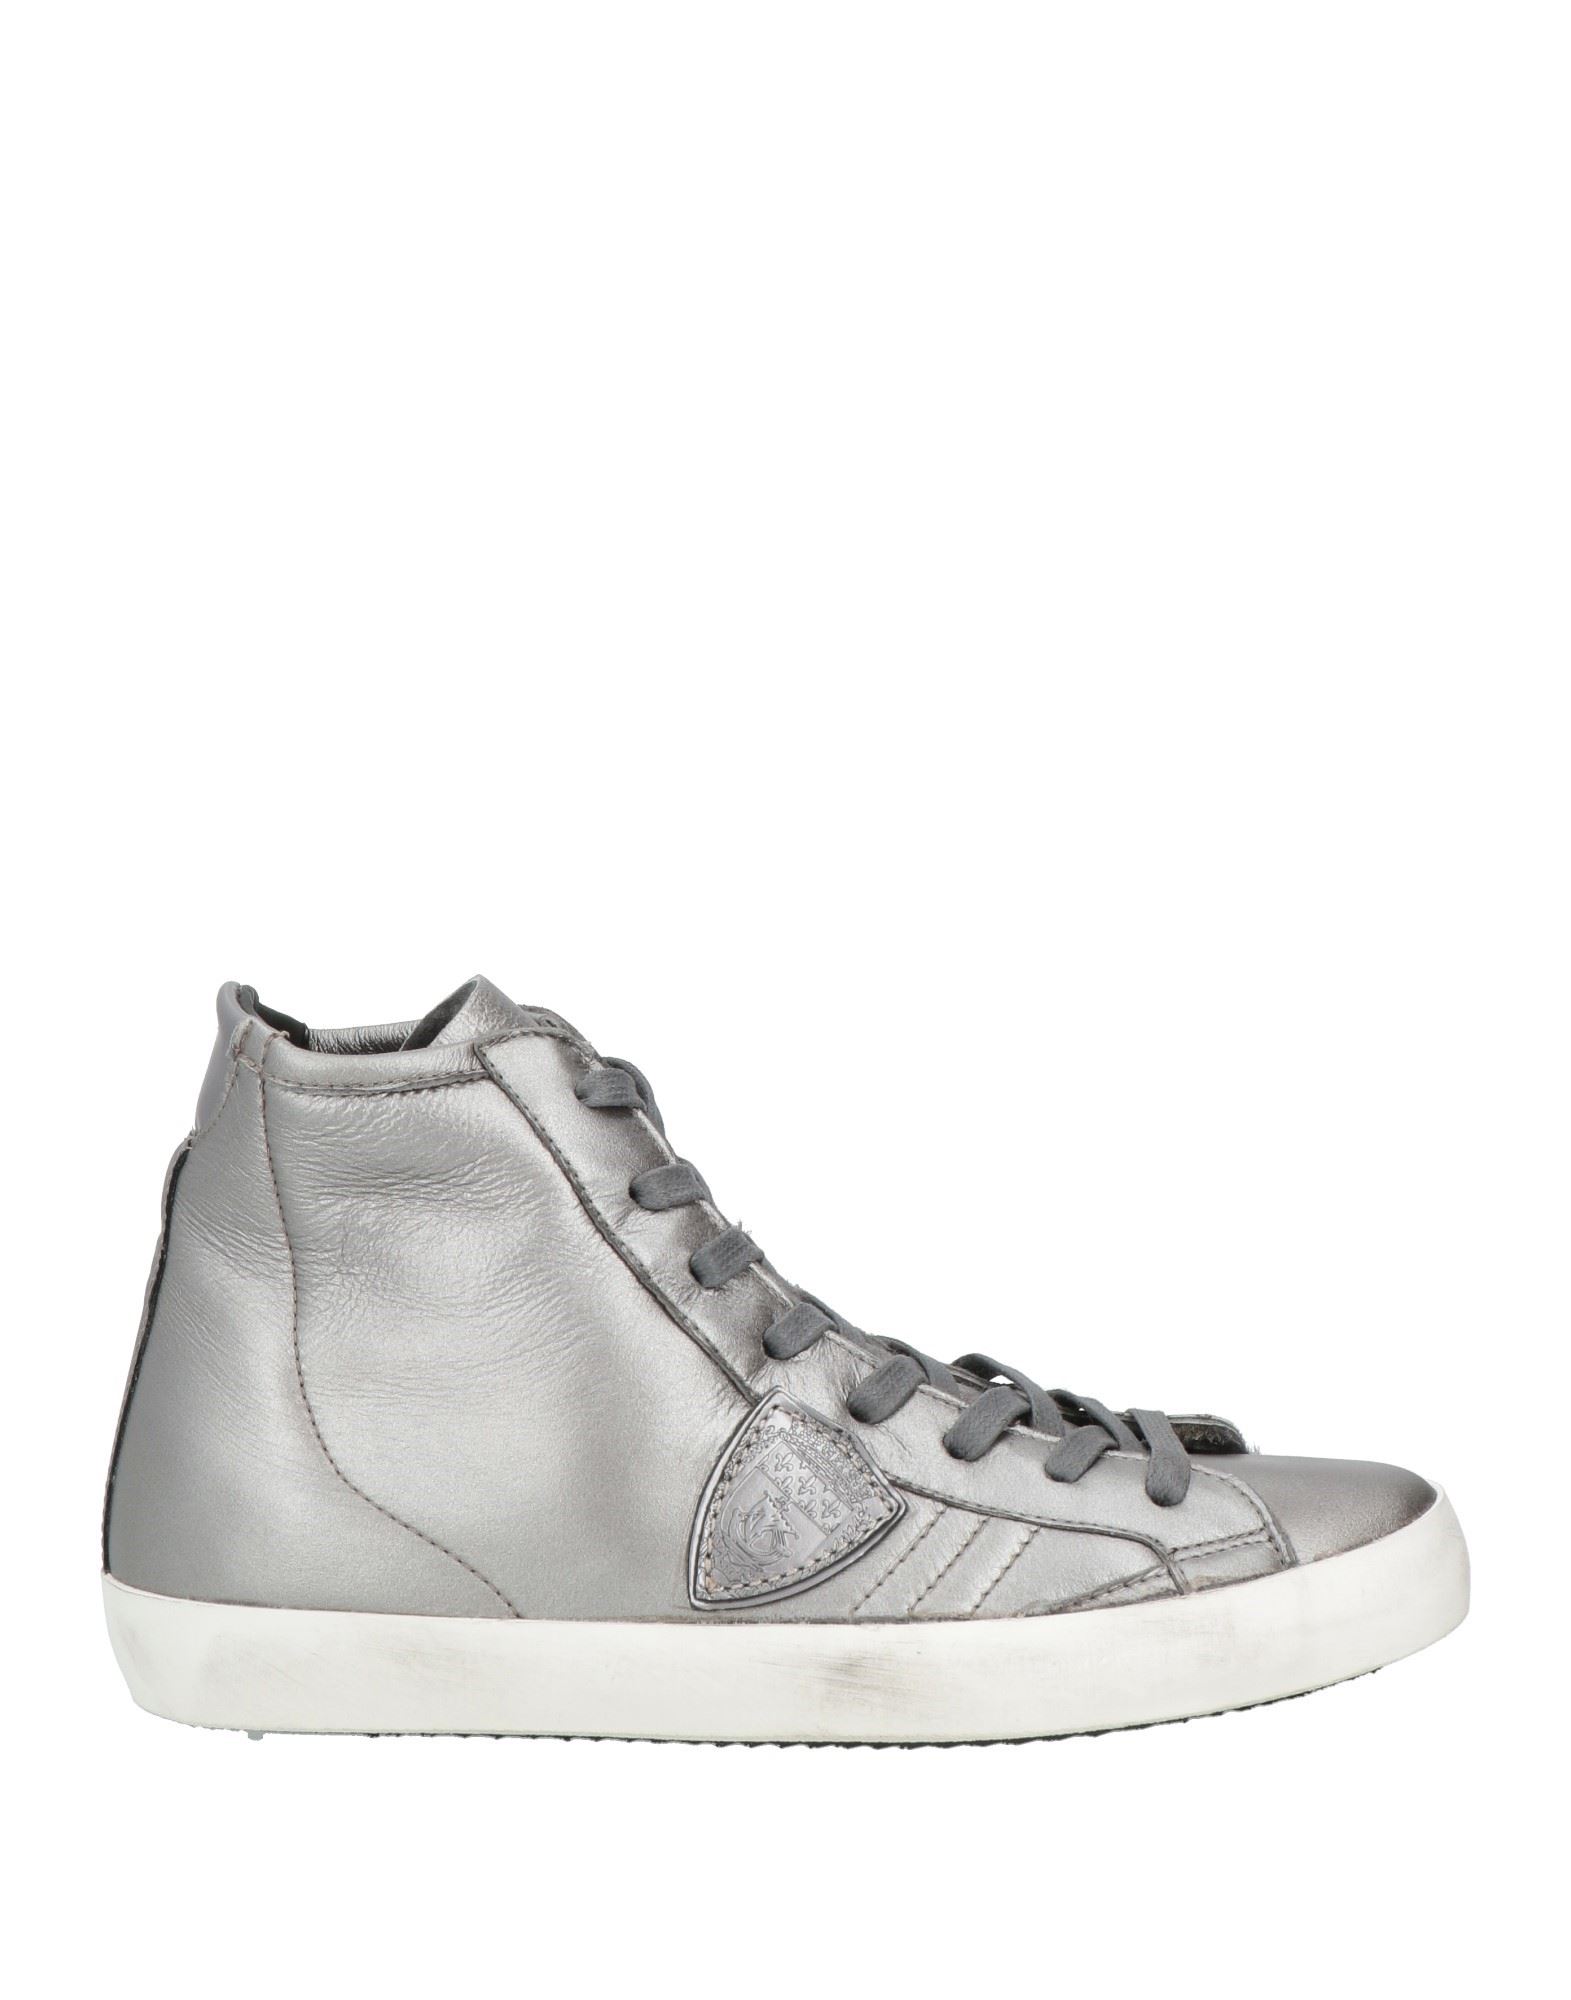 PHILIPPE MODEL PHILIPPE MODEL WOMAN SNEAKERS GREY SIZE 7 SHEARLING,11488092QI 9